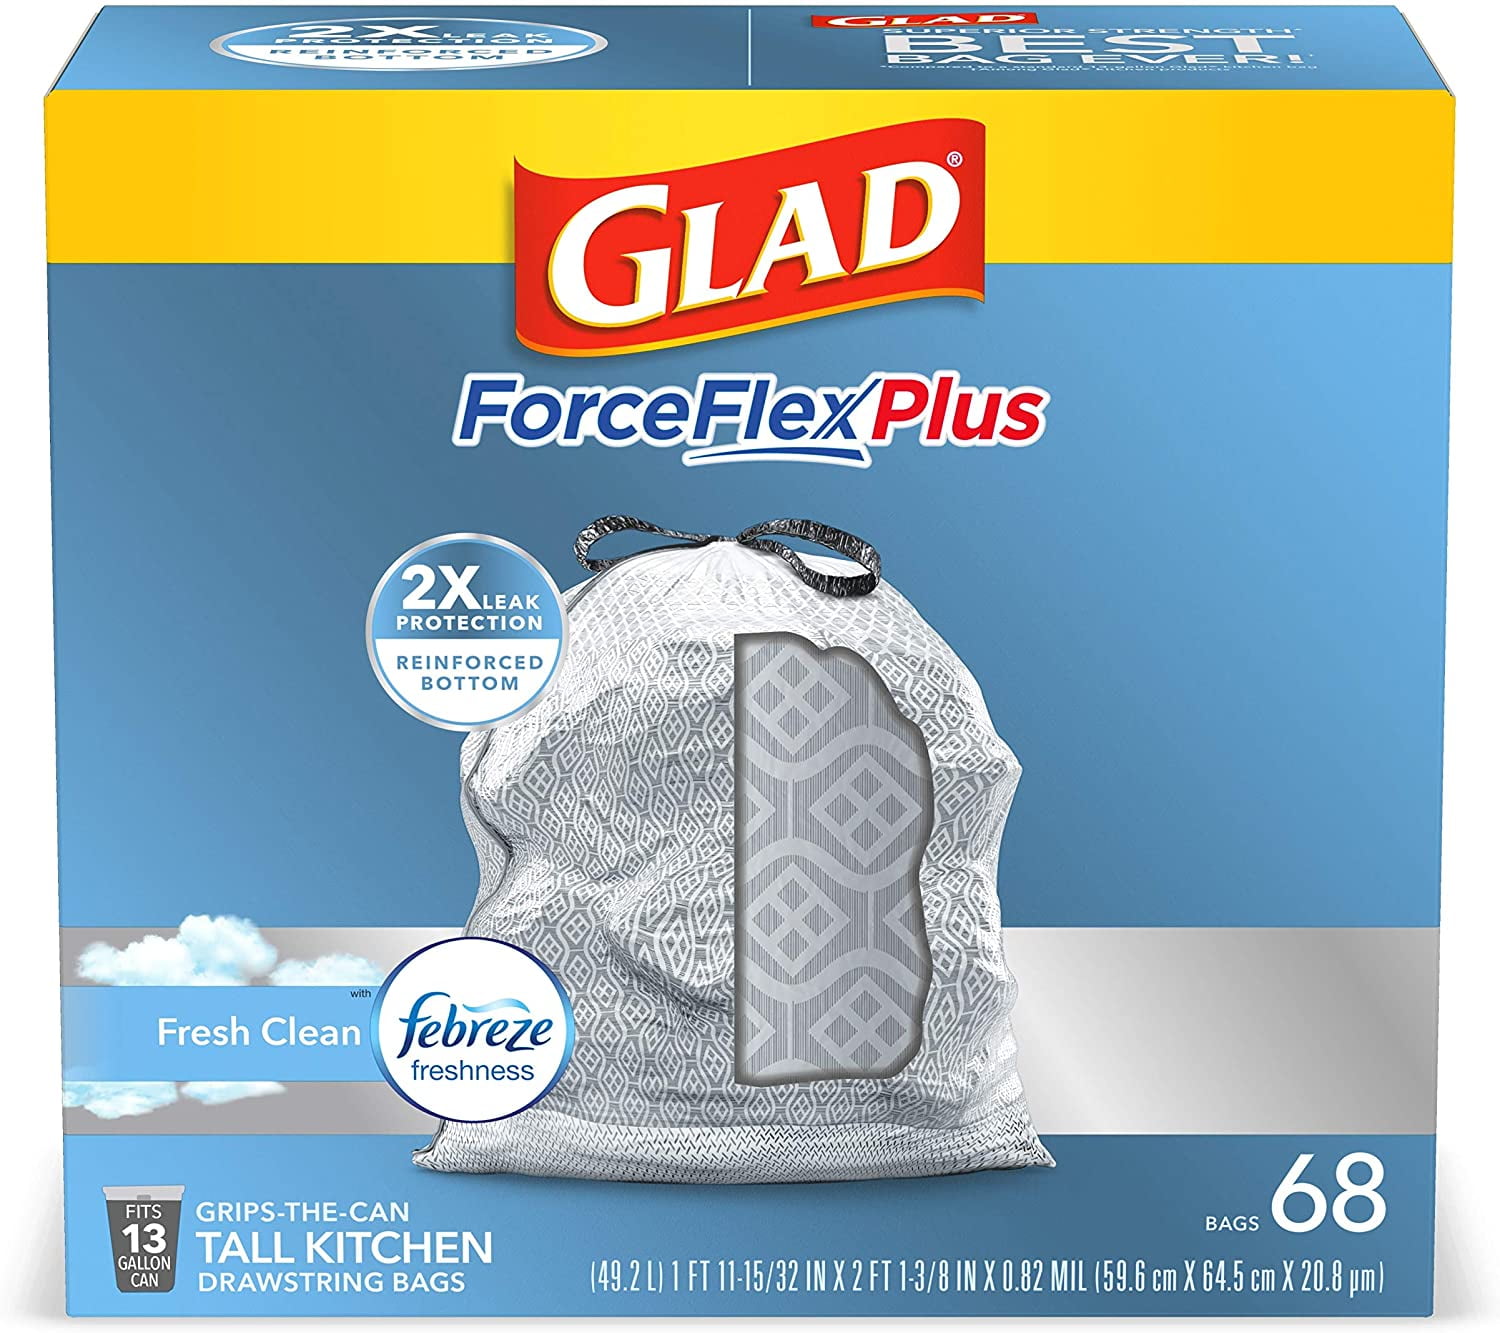 Glad ForceFlexPlus 13 Gallon Tall Kitchen Trash Bags, Cherry Blossom with  Febreze, 40 Bags 